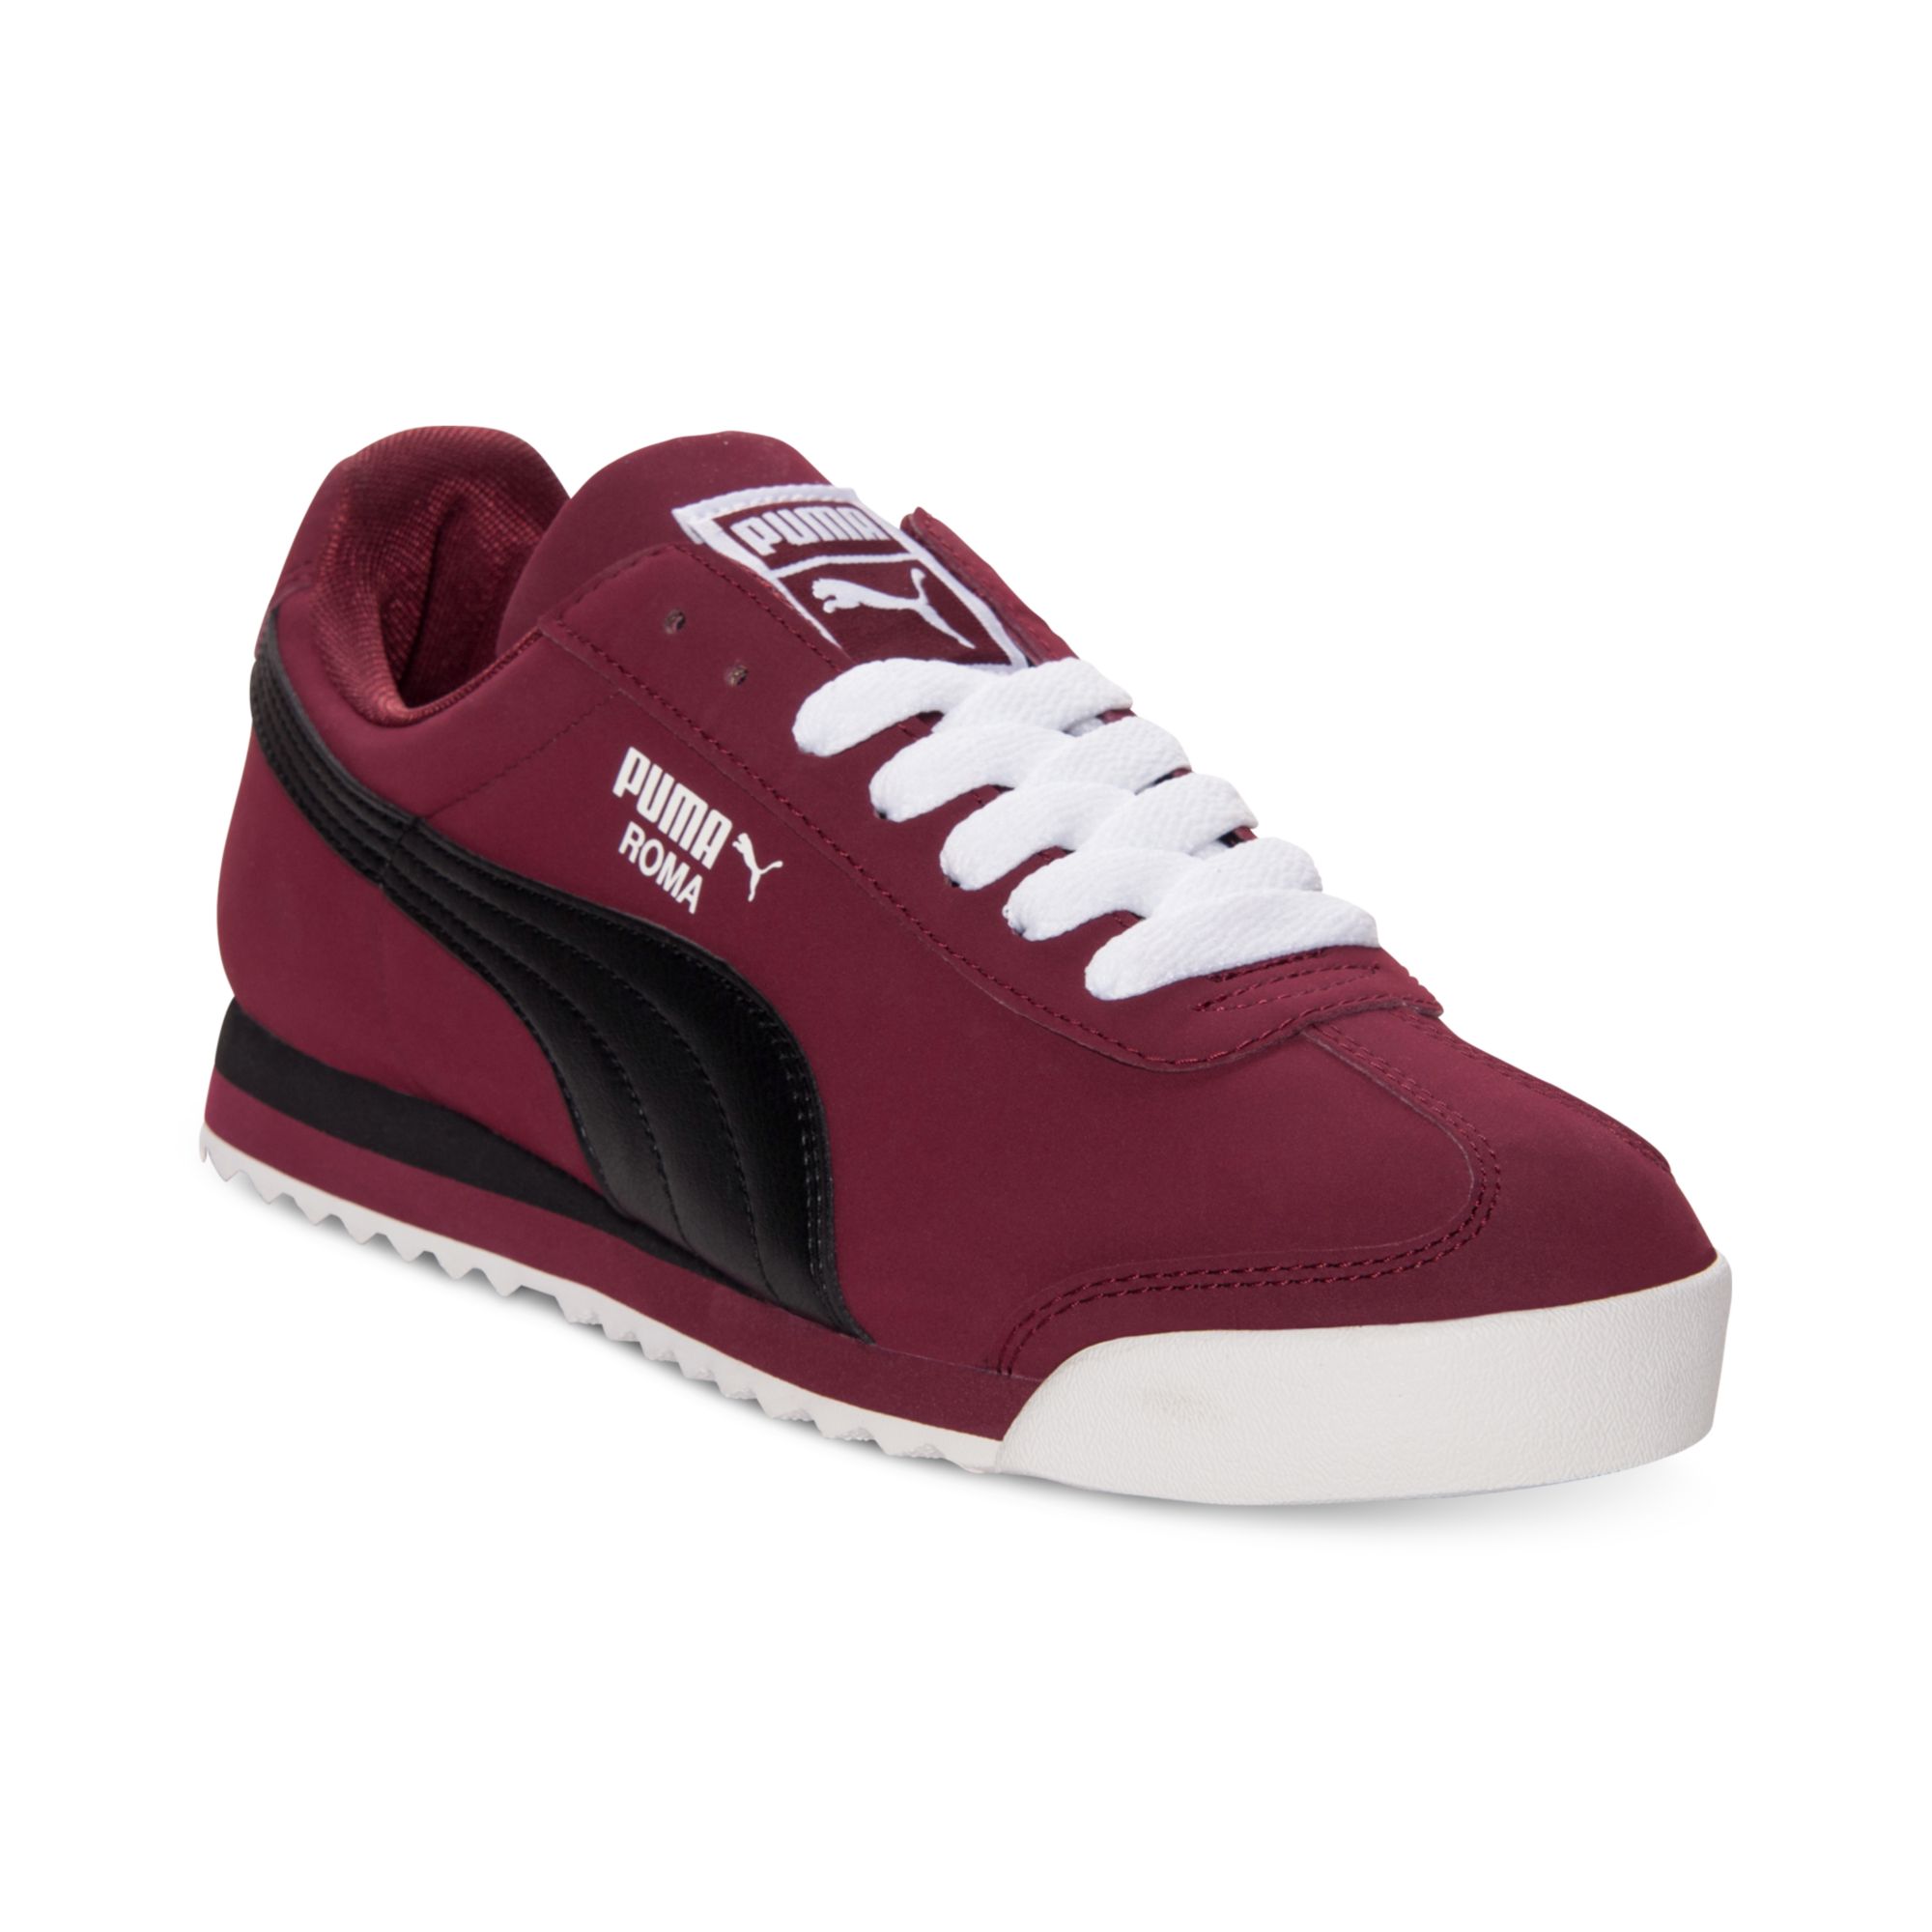 Puma Men'S Roma Sl Nubuck 2 Casual Sneakers From Finish Line in Red for ...